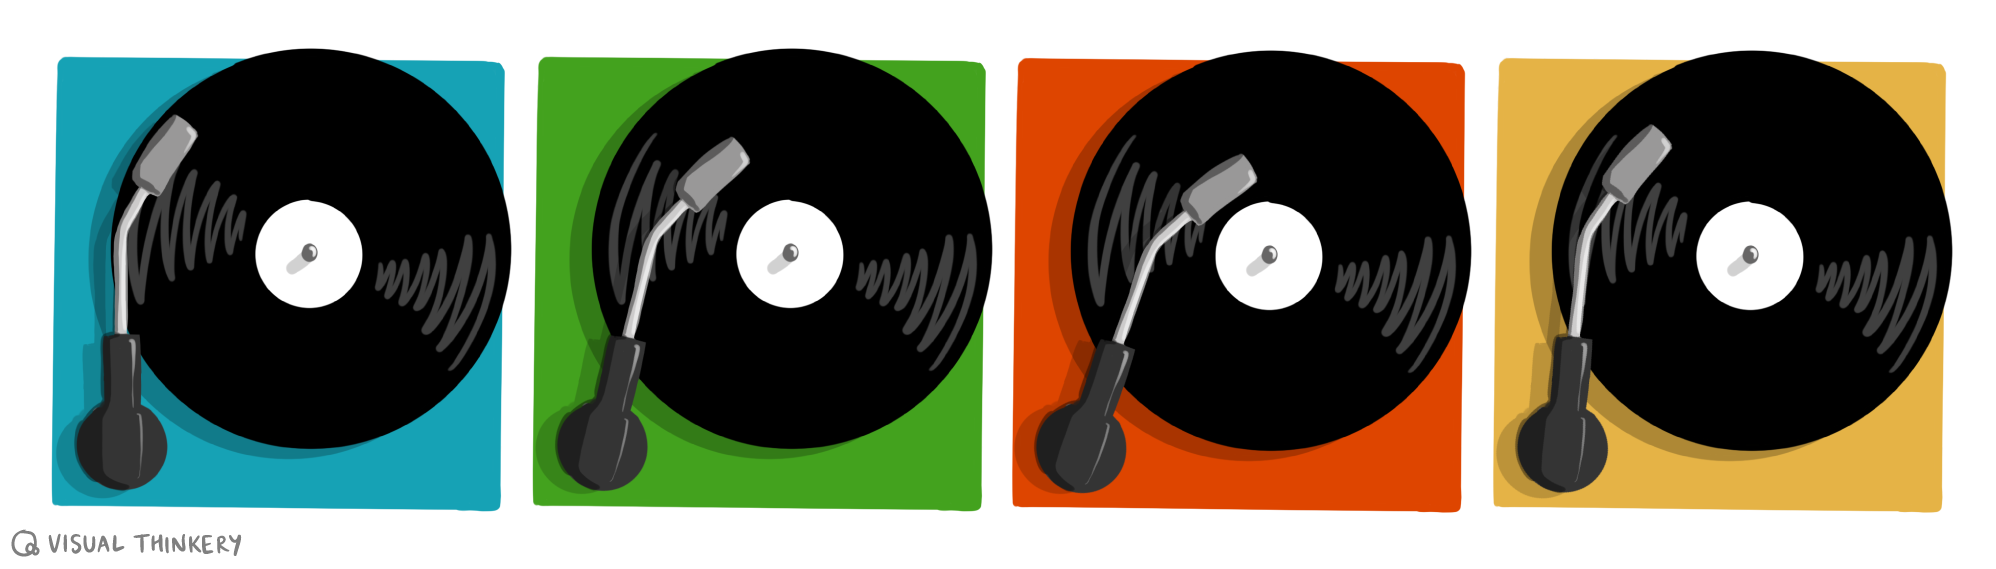 Image of four different colored record players aligned horizontally a la Andy Warhol's art style